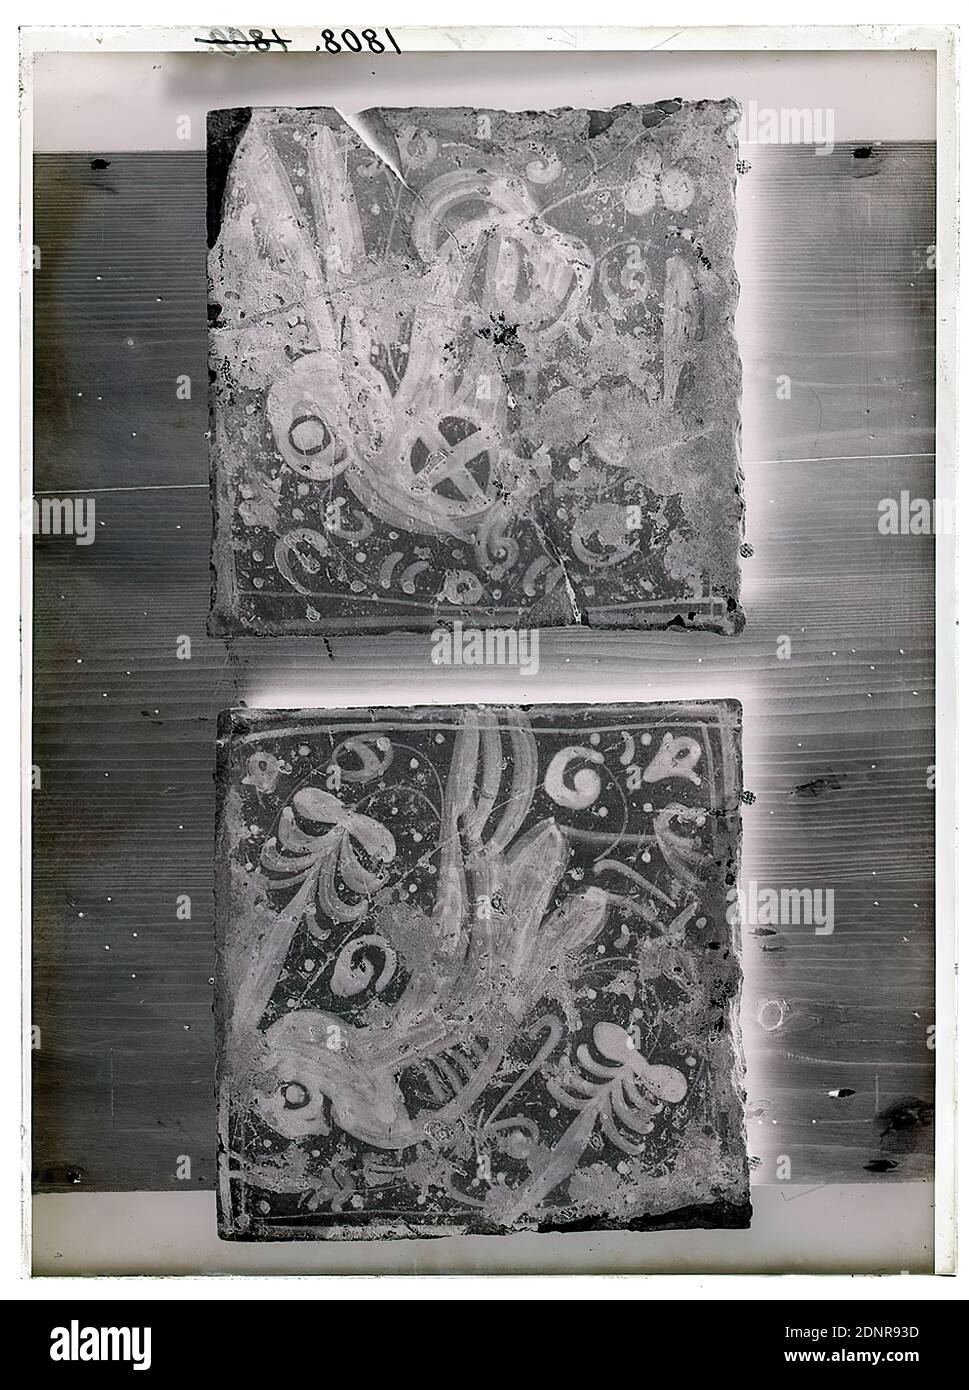 Wilhelm Weimar, Two Valencia Tiles, glass negative, black and white negative process, total: height: 23.8 cm; width: 17.8 cm, numbered: top left: in black ink: 1808. works of applied art (ceramics), ornaments, animals as ornaments, plant ornaments, birds, tiles, tiles, bricks (building materials), interior decoration (of a house Stock Photo